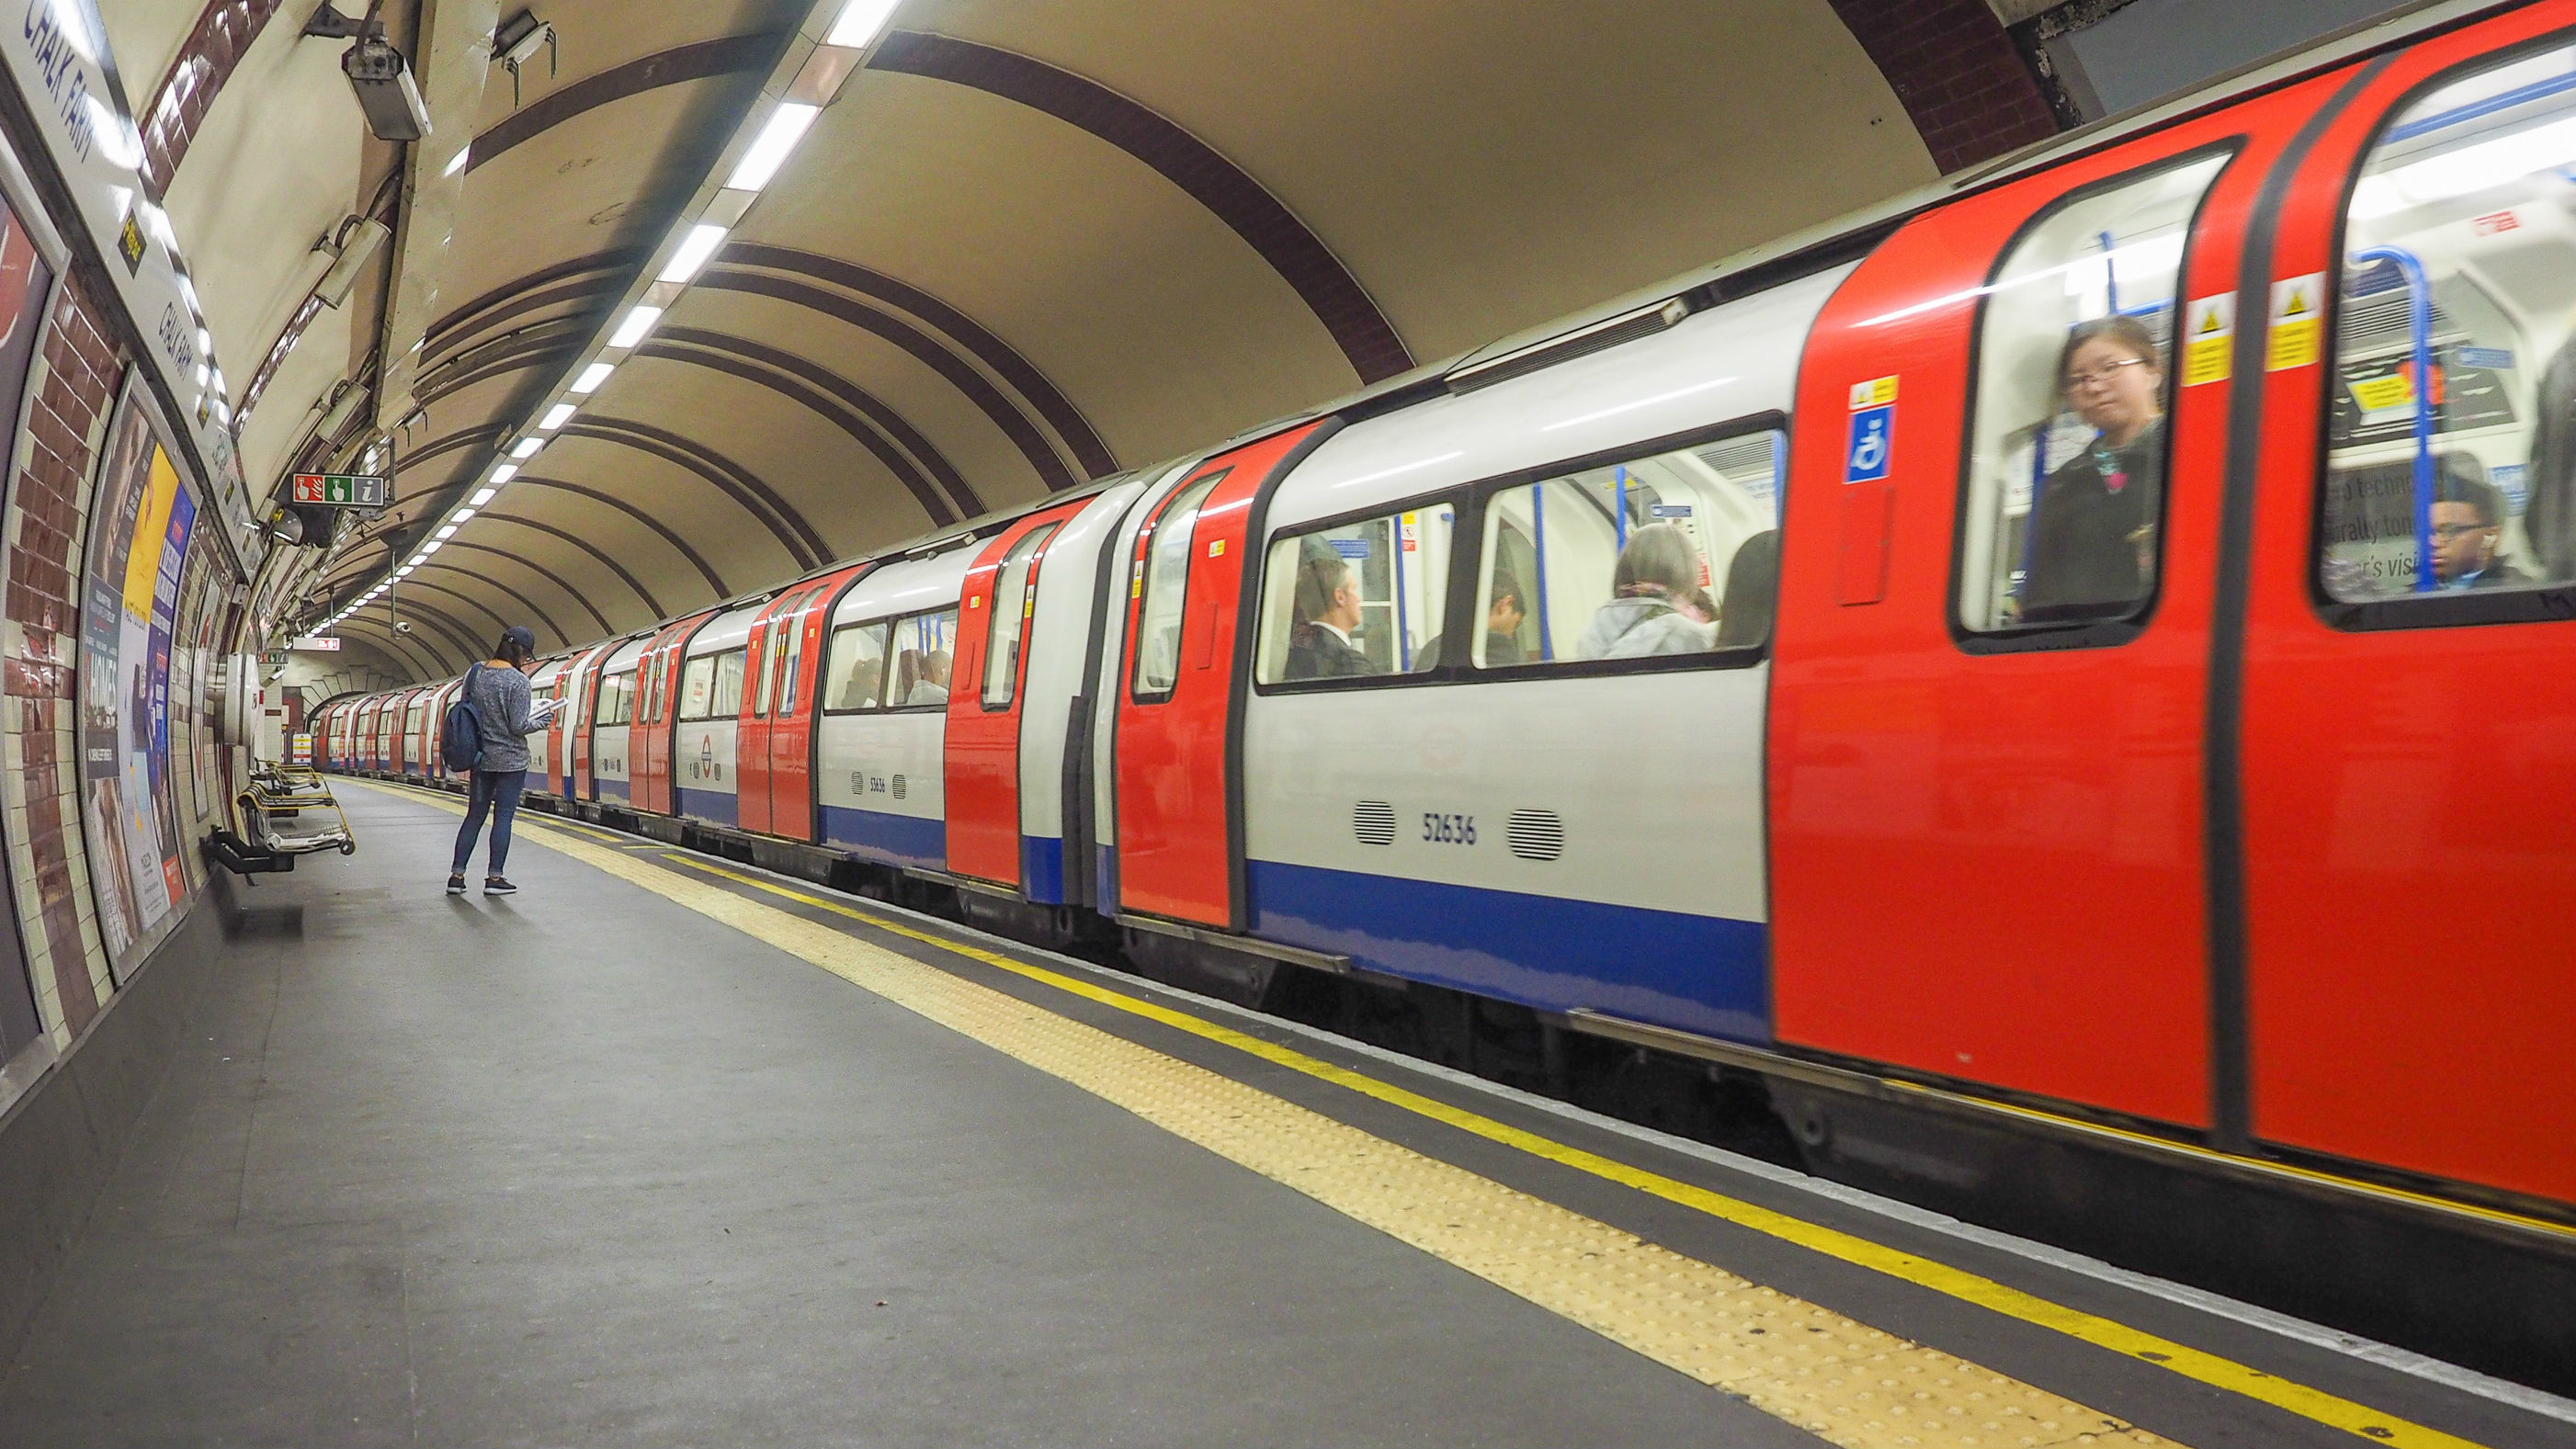 Here's you to know the London tube closures